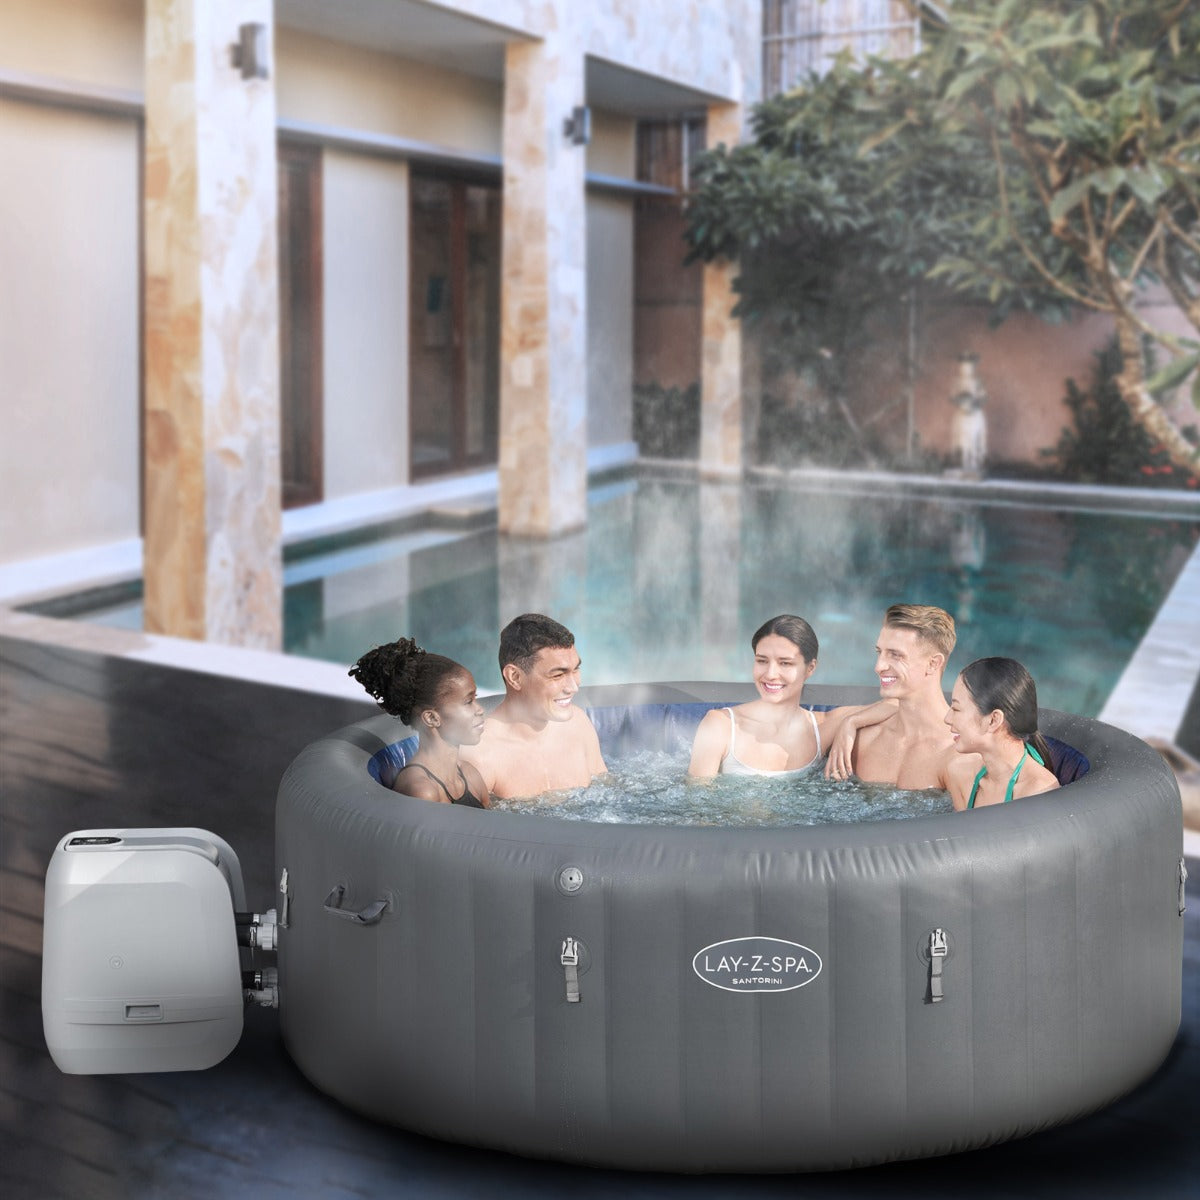 Bestway Lazy Spa Santorini 140 Airjets 5 to 7 People | Outbax